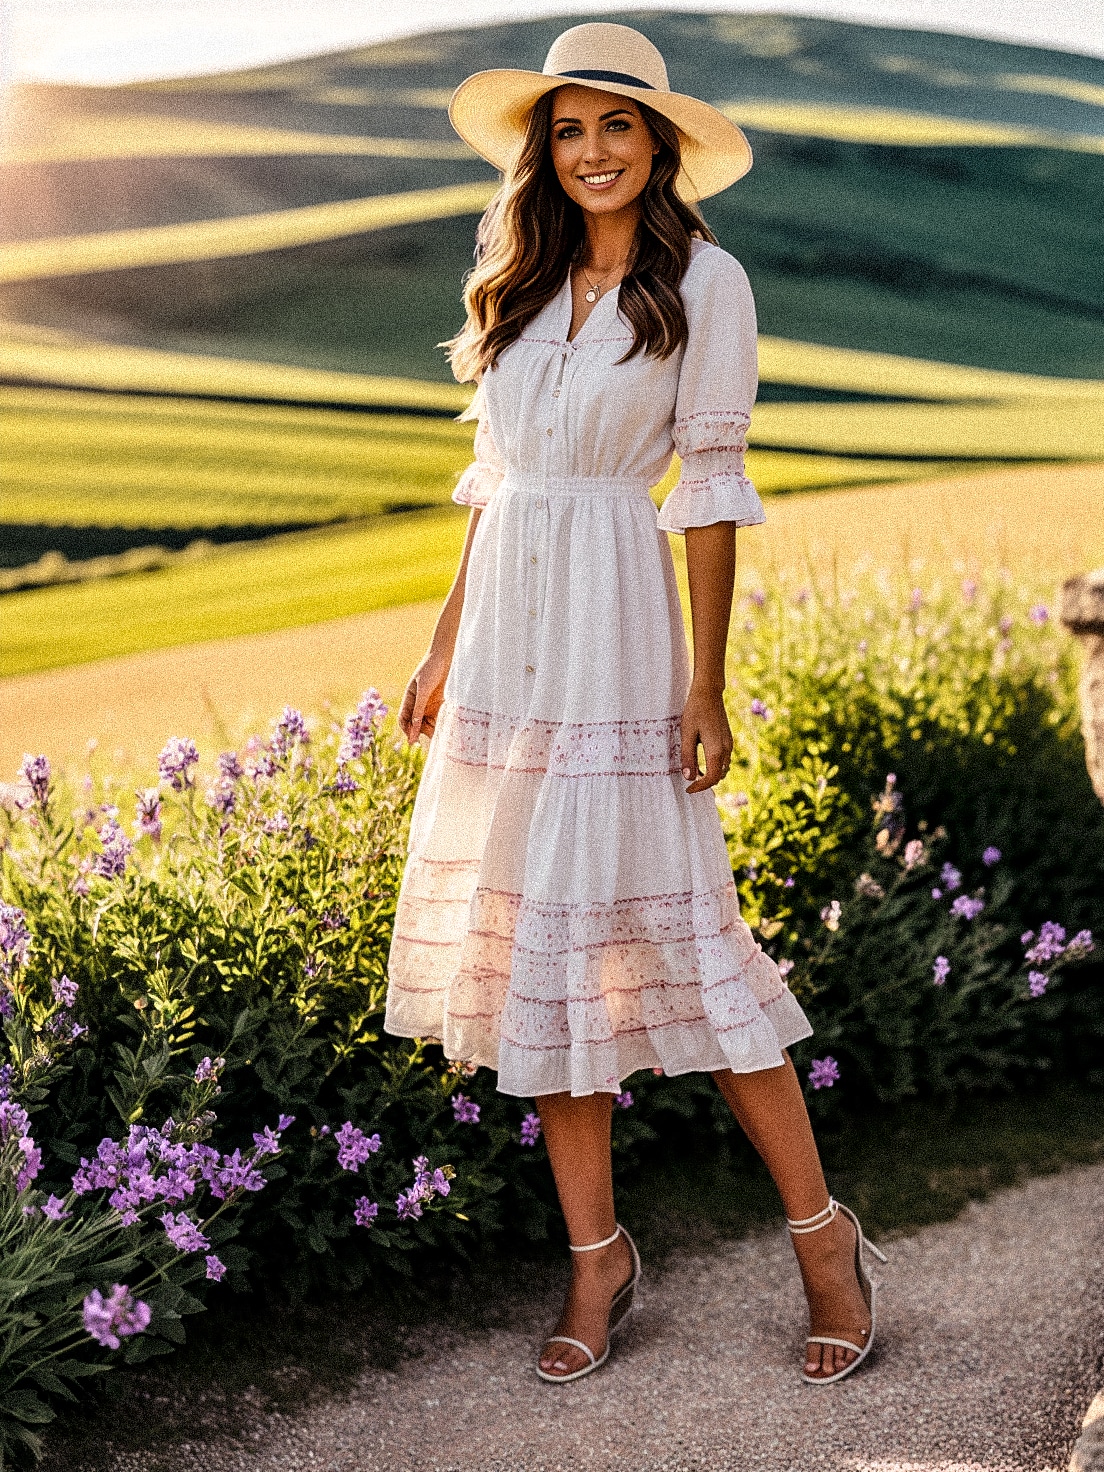 A woman, dressed in a white dress and hat, perfect for a wedding, in a beautiful field.